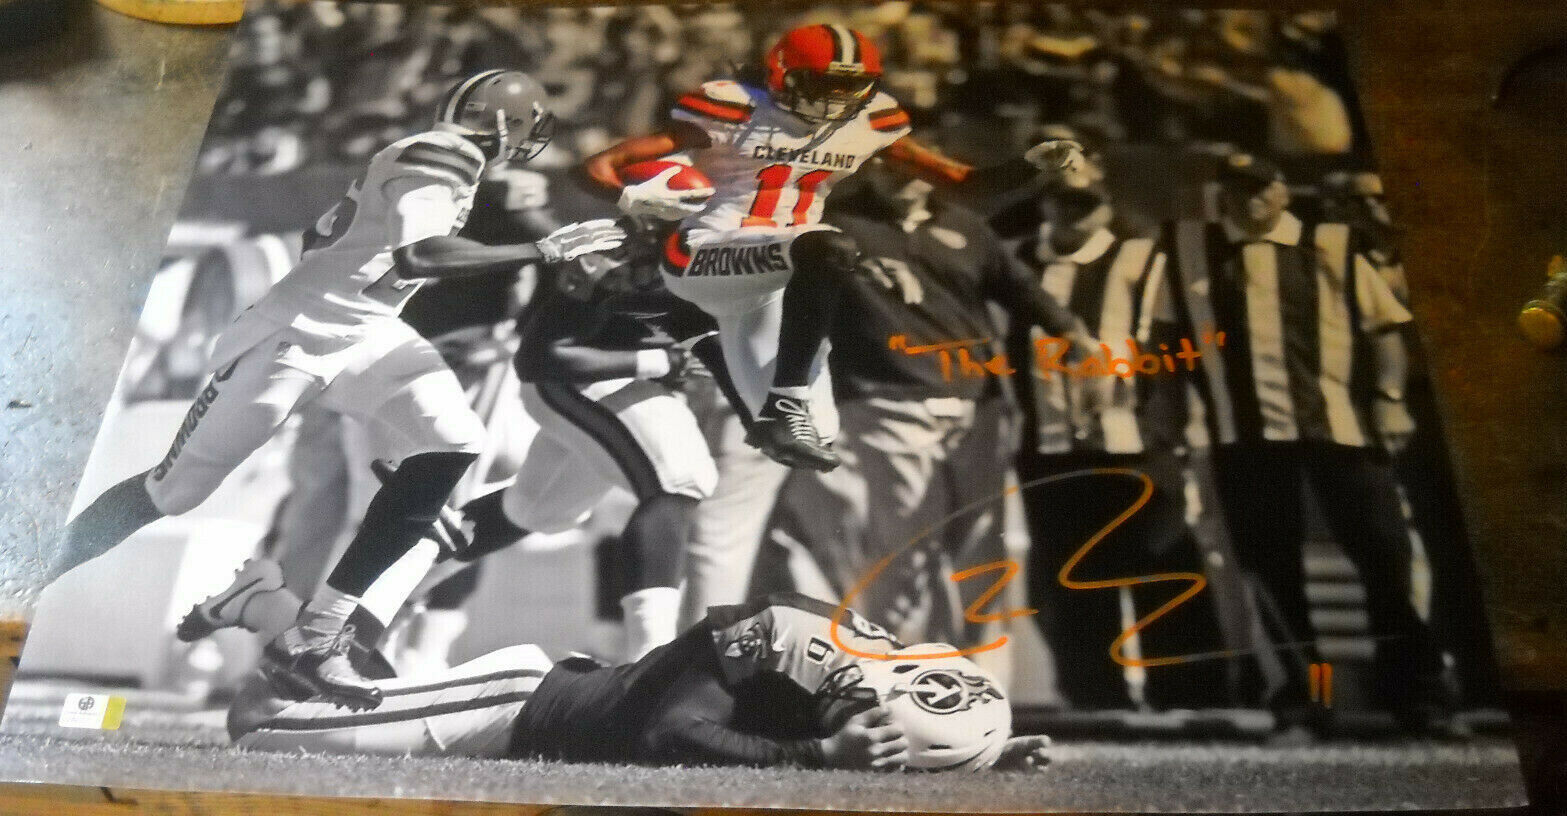 TRAVIS BENJAMIN AUTOGRAPH SIGNED 16X20 Photo Poster painting GLOBAL CLEVELAND BROWNS THE RABBIT